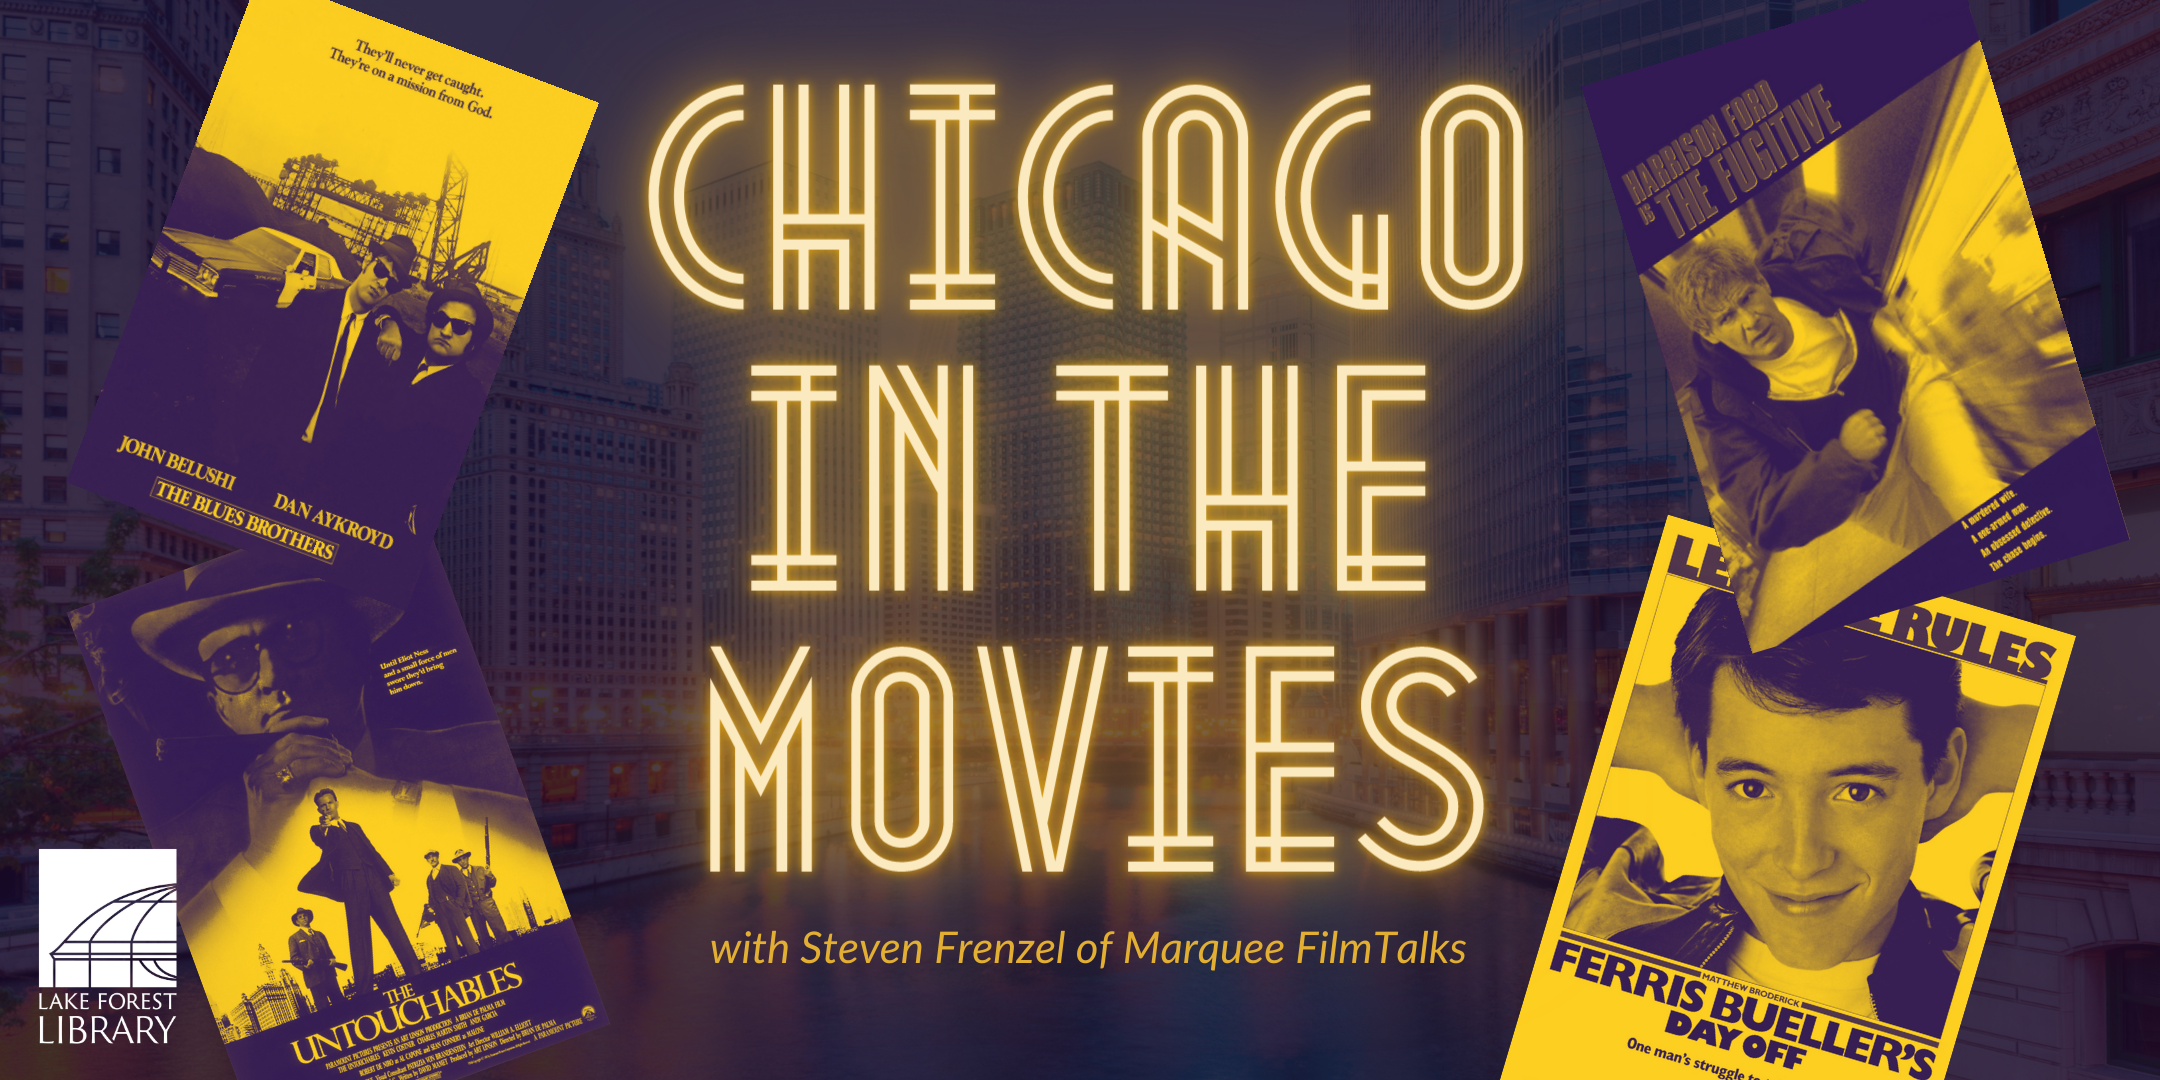 image of neon yellow line decorative text stating Chicago in the Movies with Steven Franzel of Marquee Film Talks, on a darker purple tinted overlay background over an image of the Chicago river. The movie posters of The Blues Brothers, The Untouchables, The Fugitive, and Ferris Bueller's Day Off feature to the right and left of the text. The Lake Forest Library logo is in the bottom left hand corner.